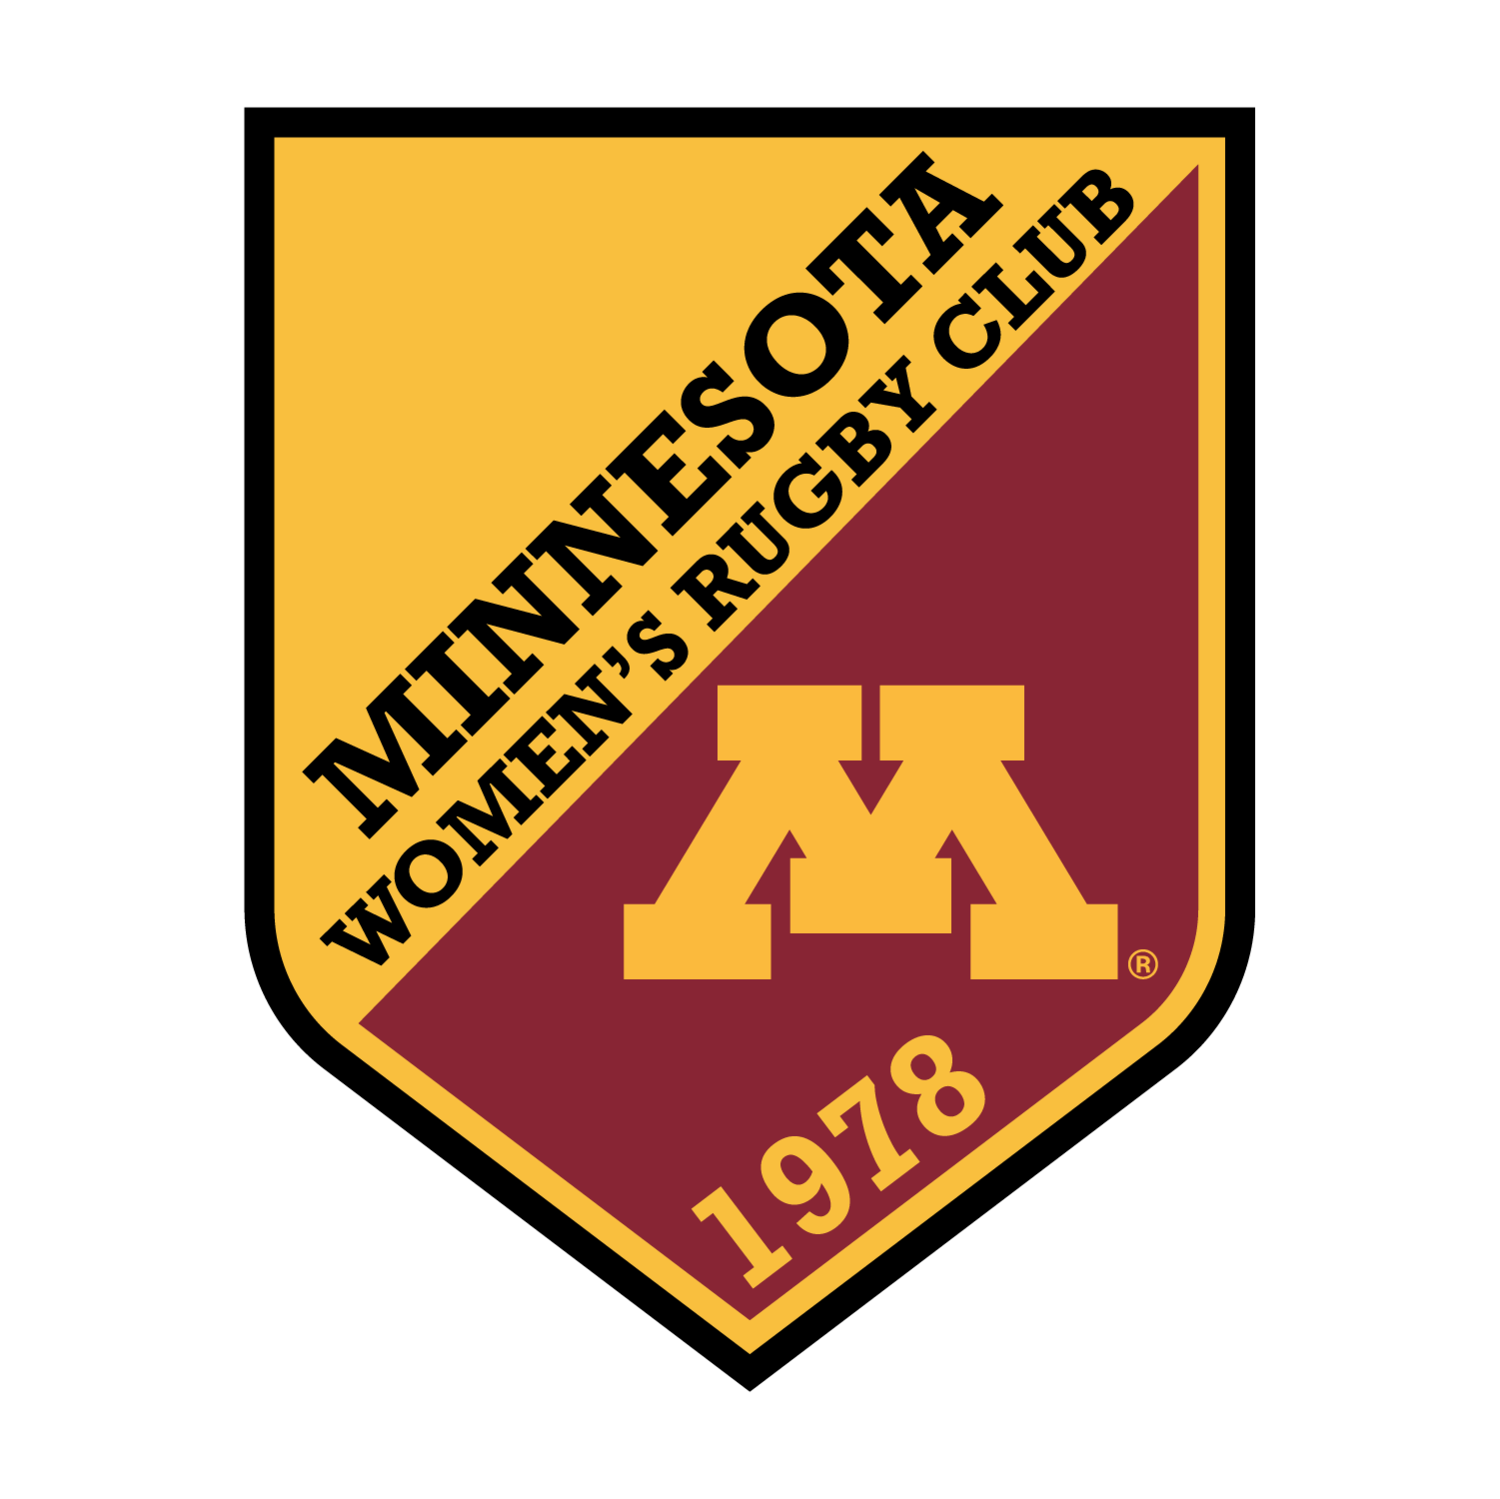 contact-university-of-minnesota-women-s-rugby-club